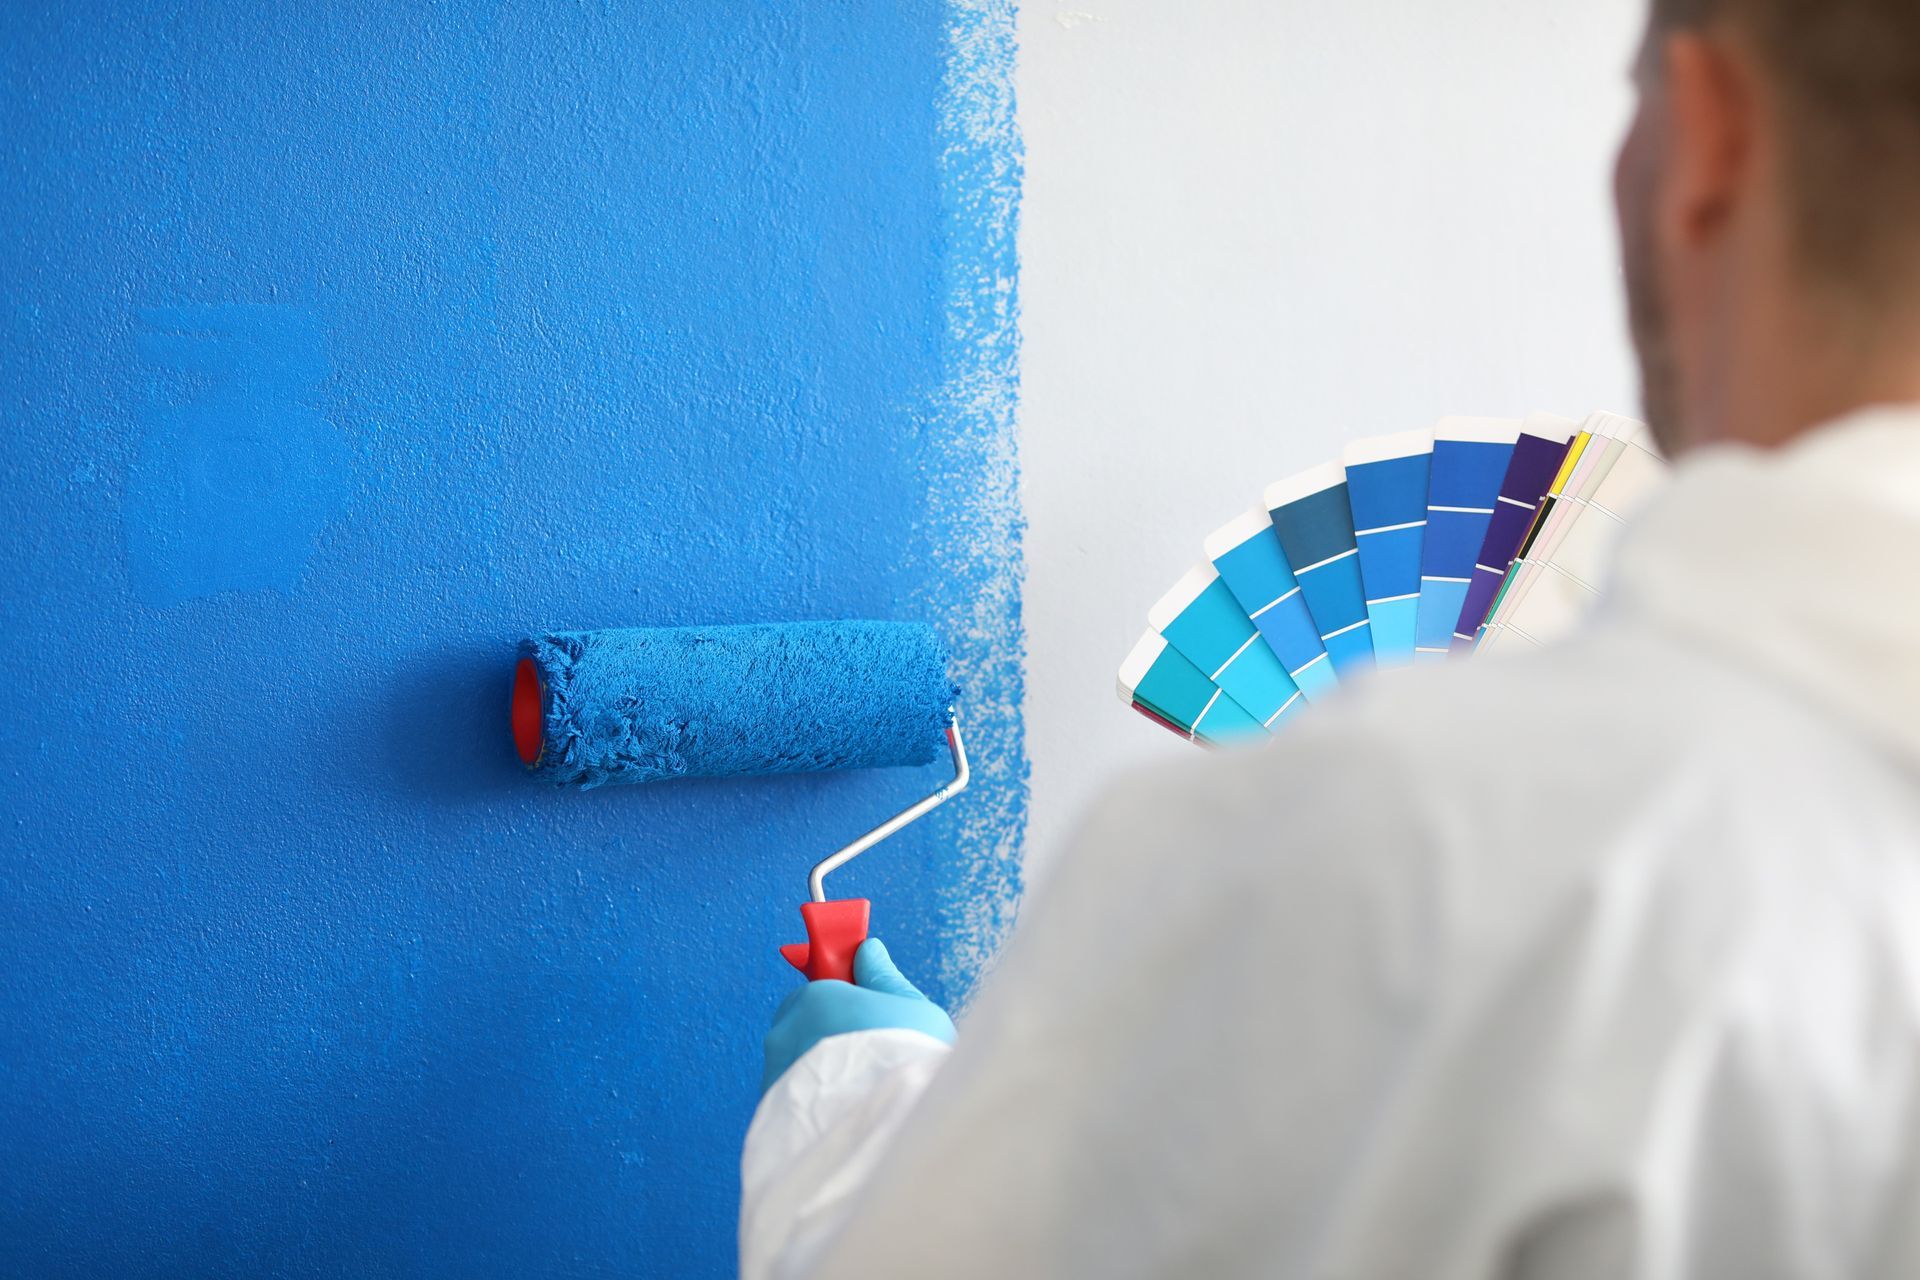 contractor paints a wall blue with a roller and holds a color palette in his other hand